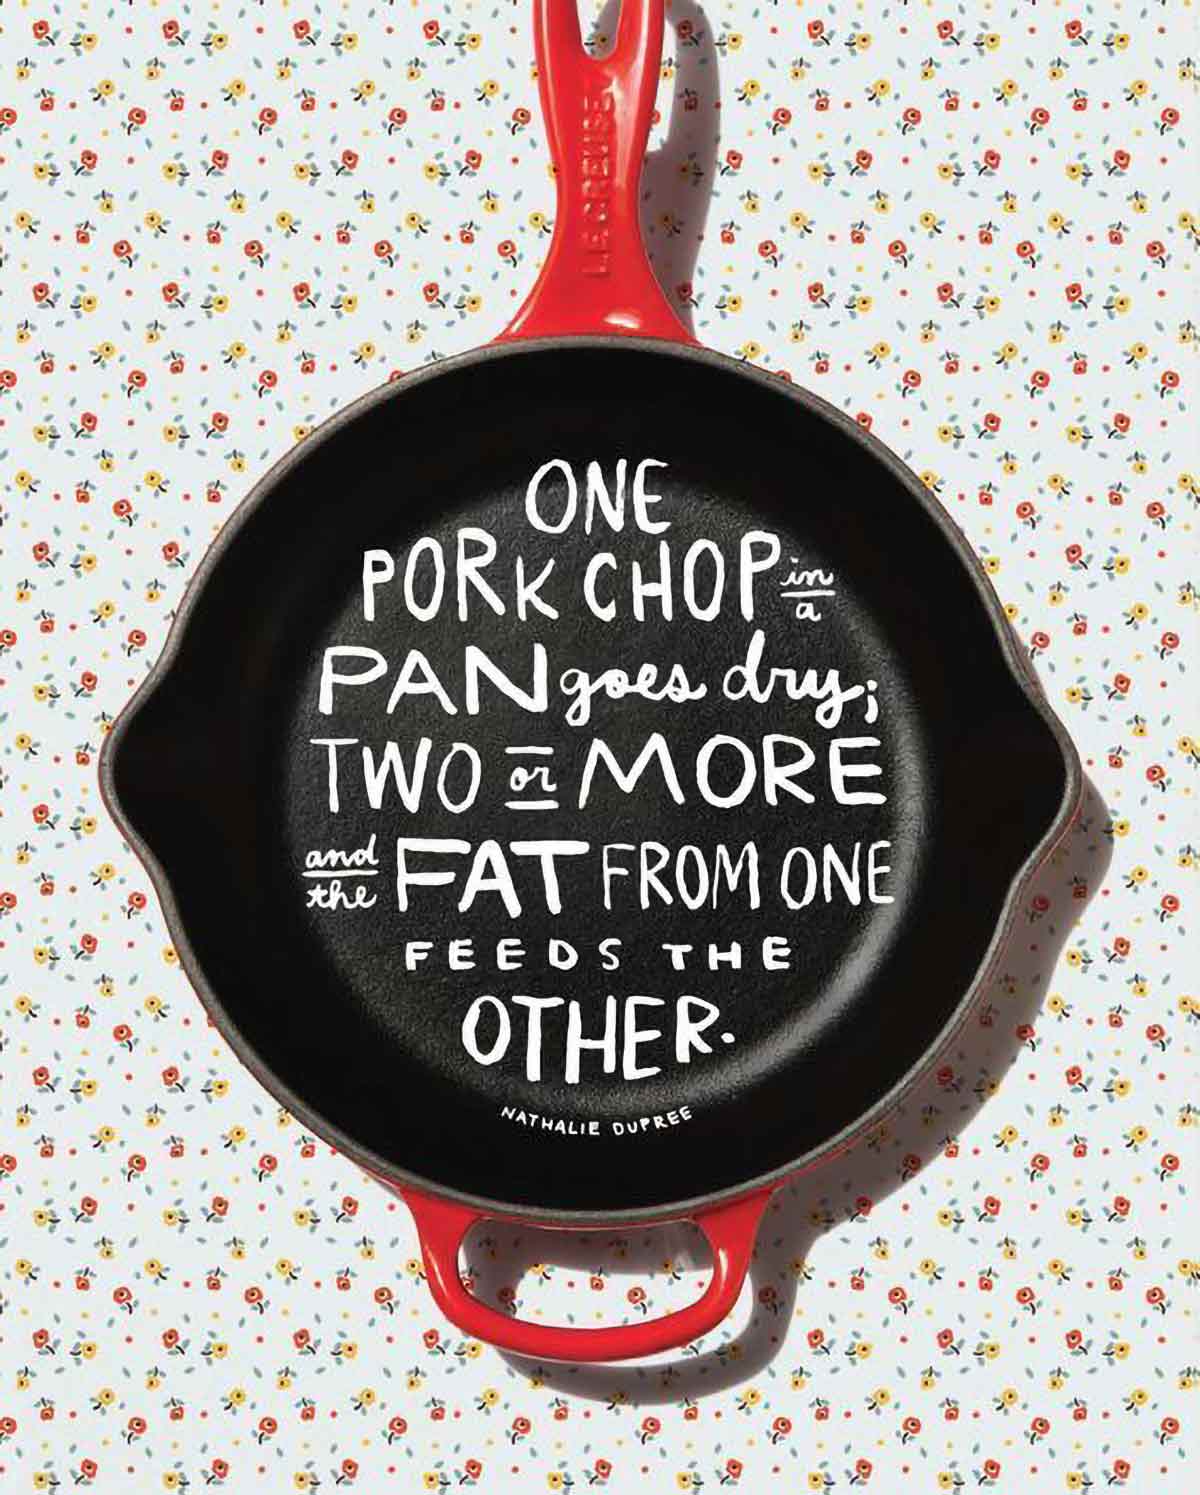 A quote about pork chops written inside a cast iron skillet.